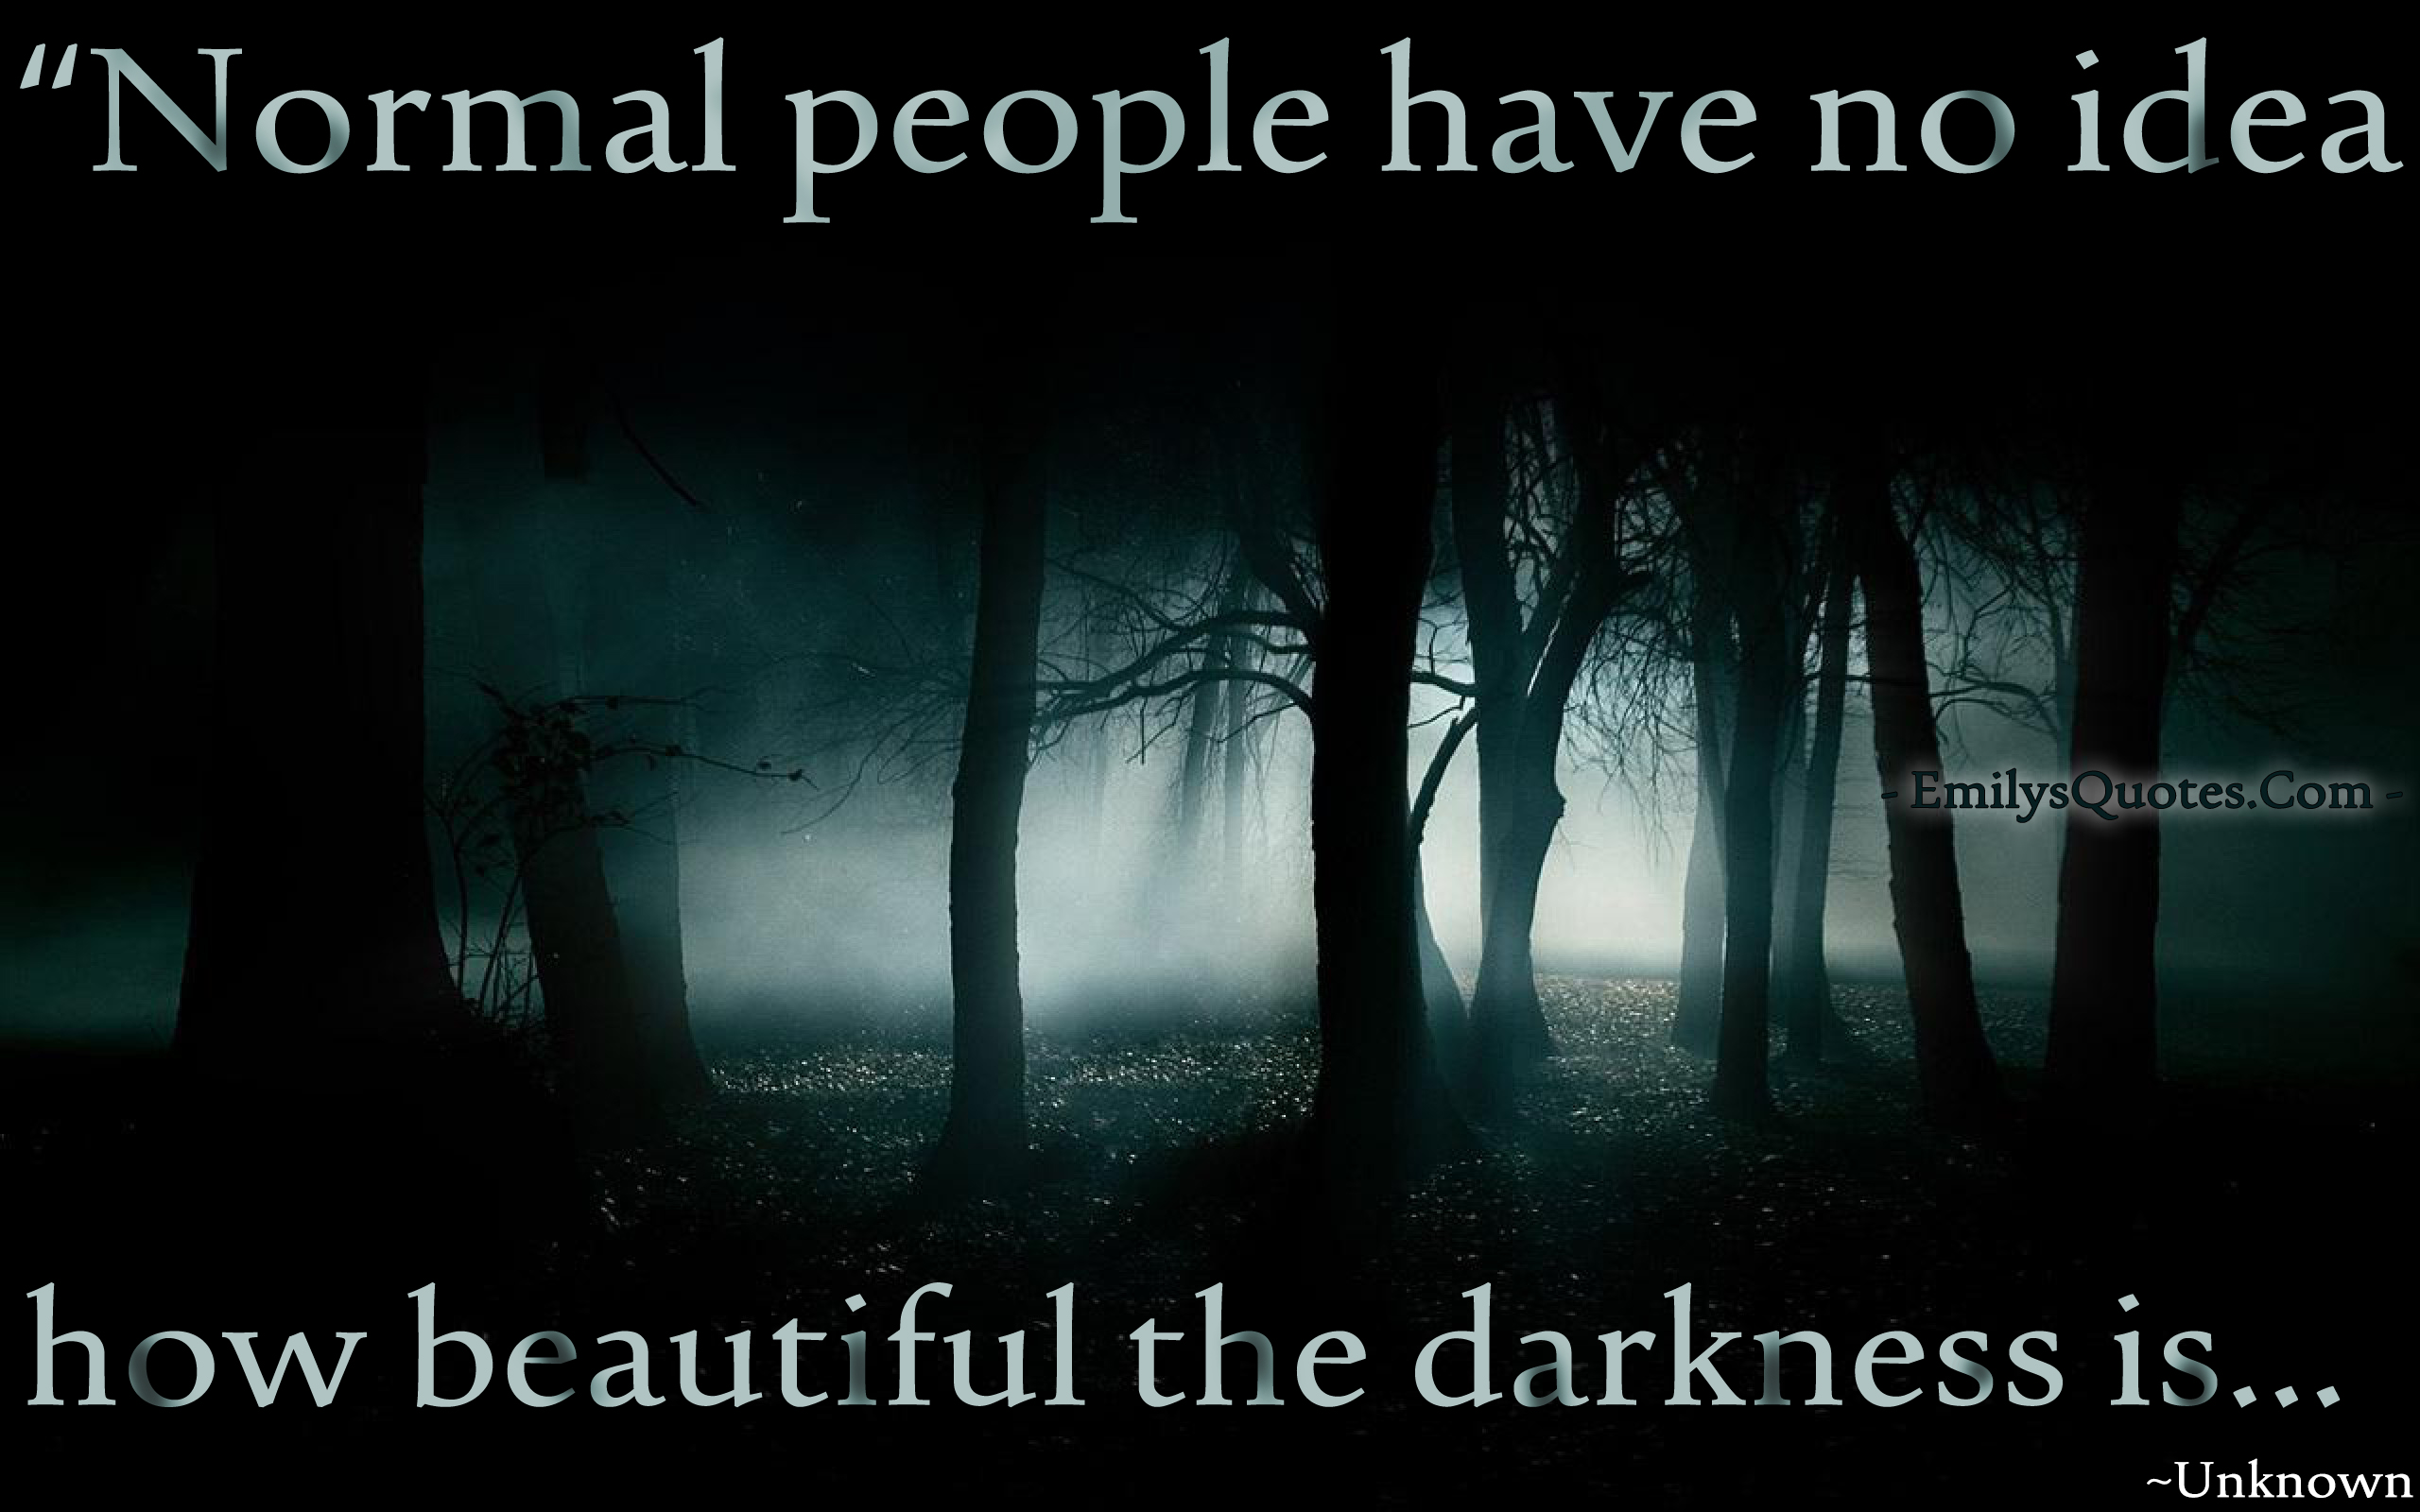 Normal people have no idea how beautiful the darkness is